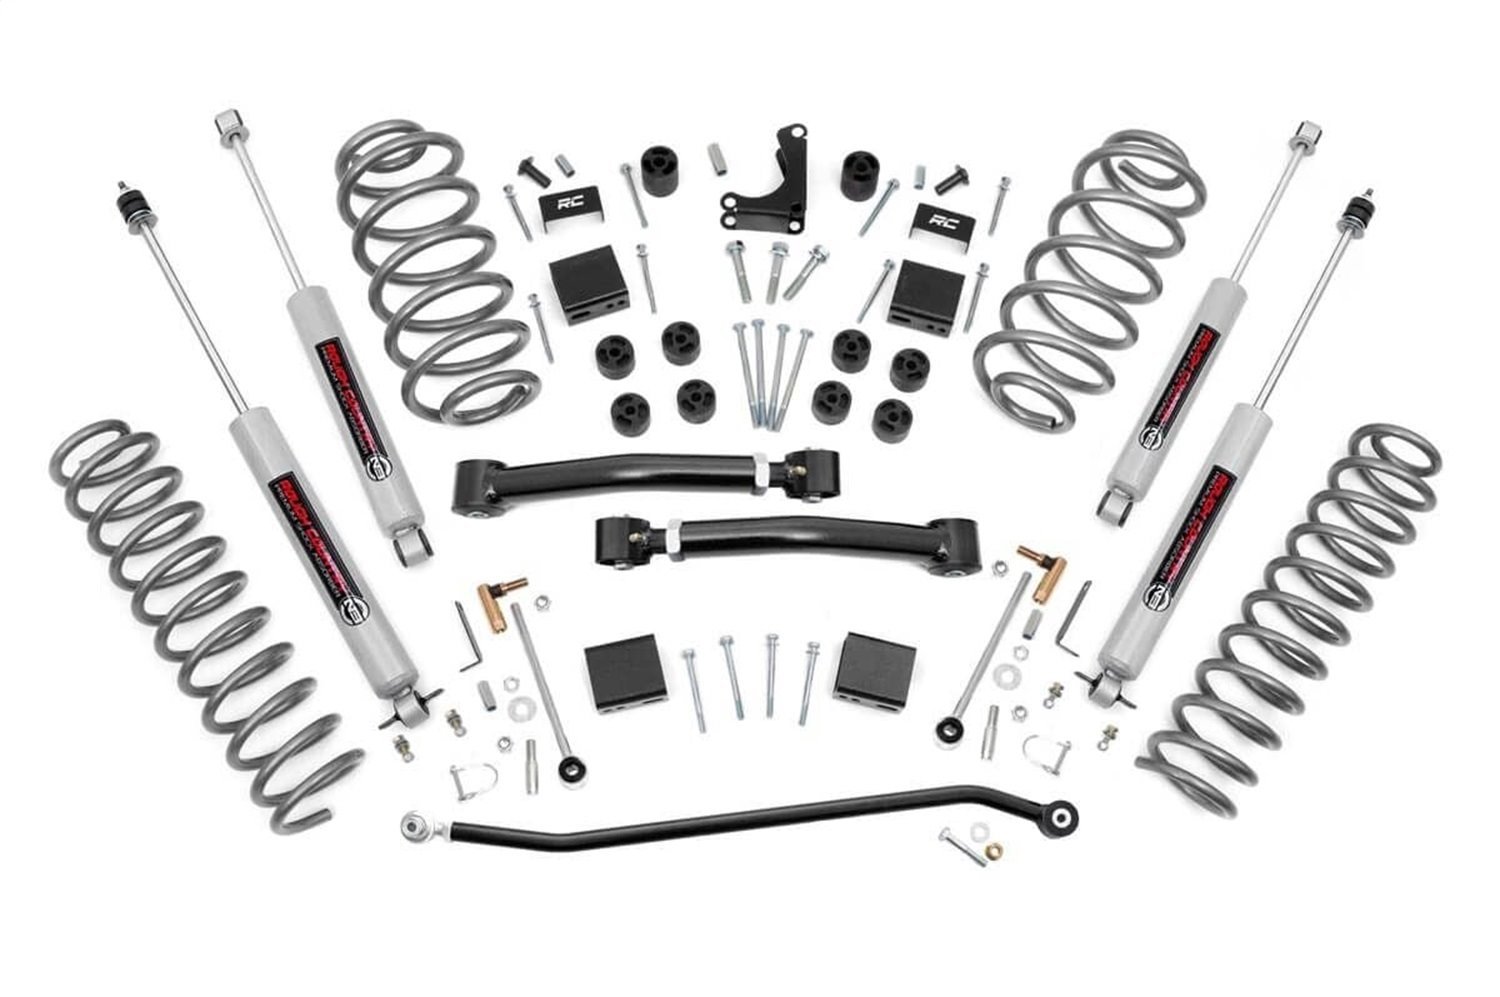 639P 4-inch X-Series Suspension Lift System